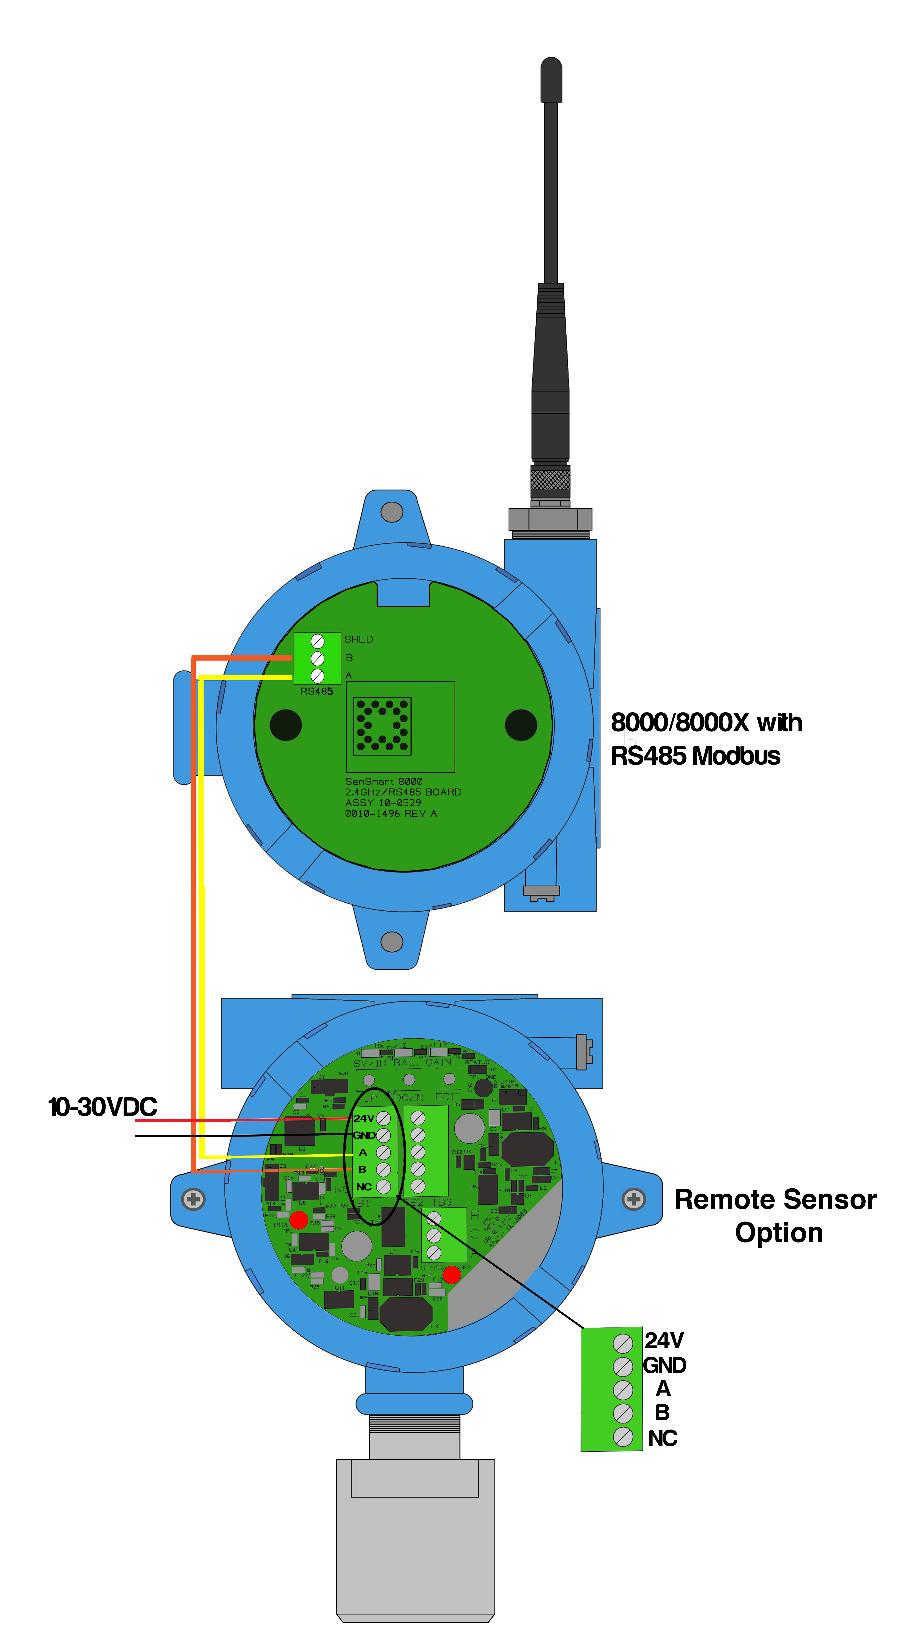 Connect 24VDC and ground wires to the 24V and GND terminals on TB1 or TB2 of the Remote Sensor Option Board to supply the necessary 24V.